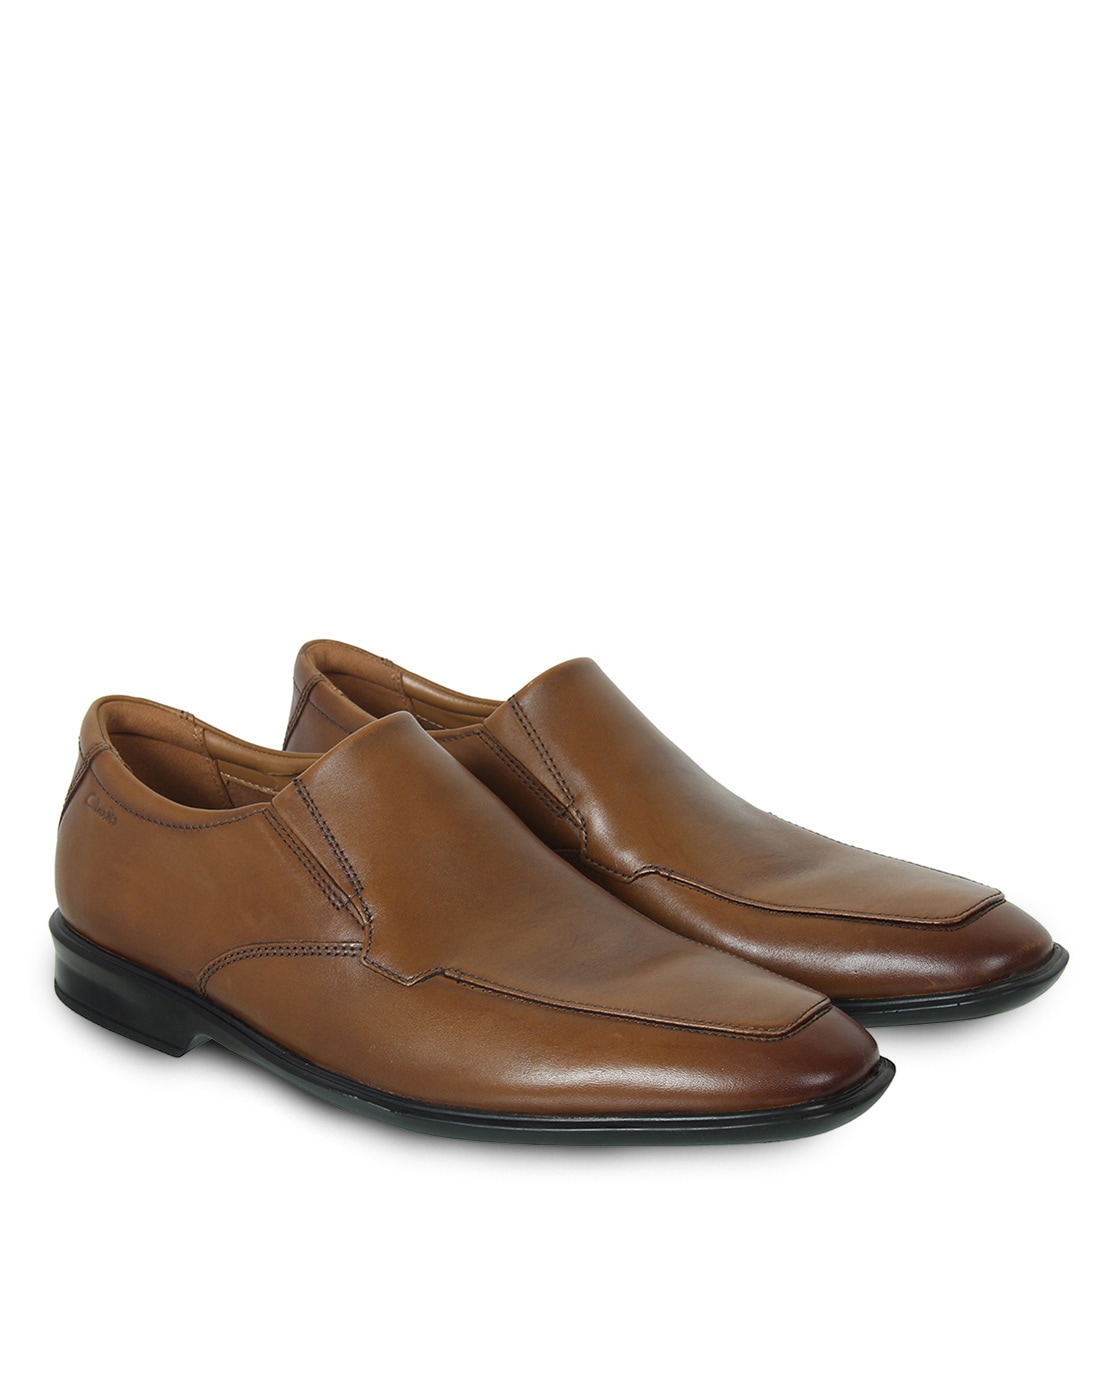 Buy Tan Casual Shoes for Men by CLARKS 